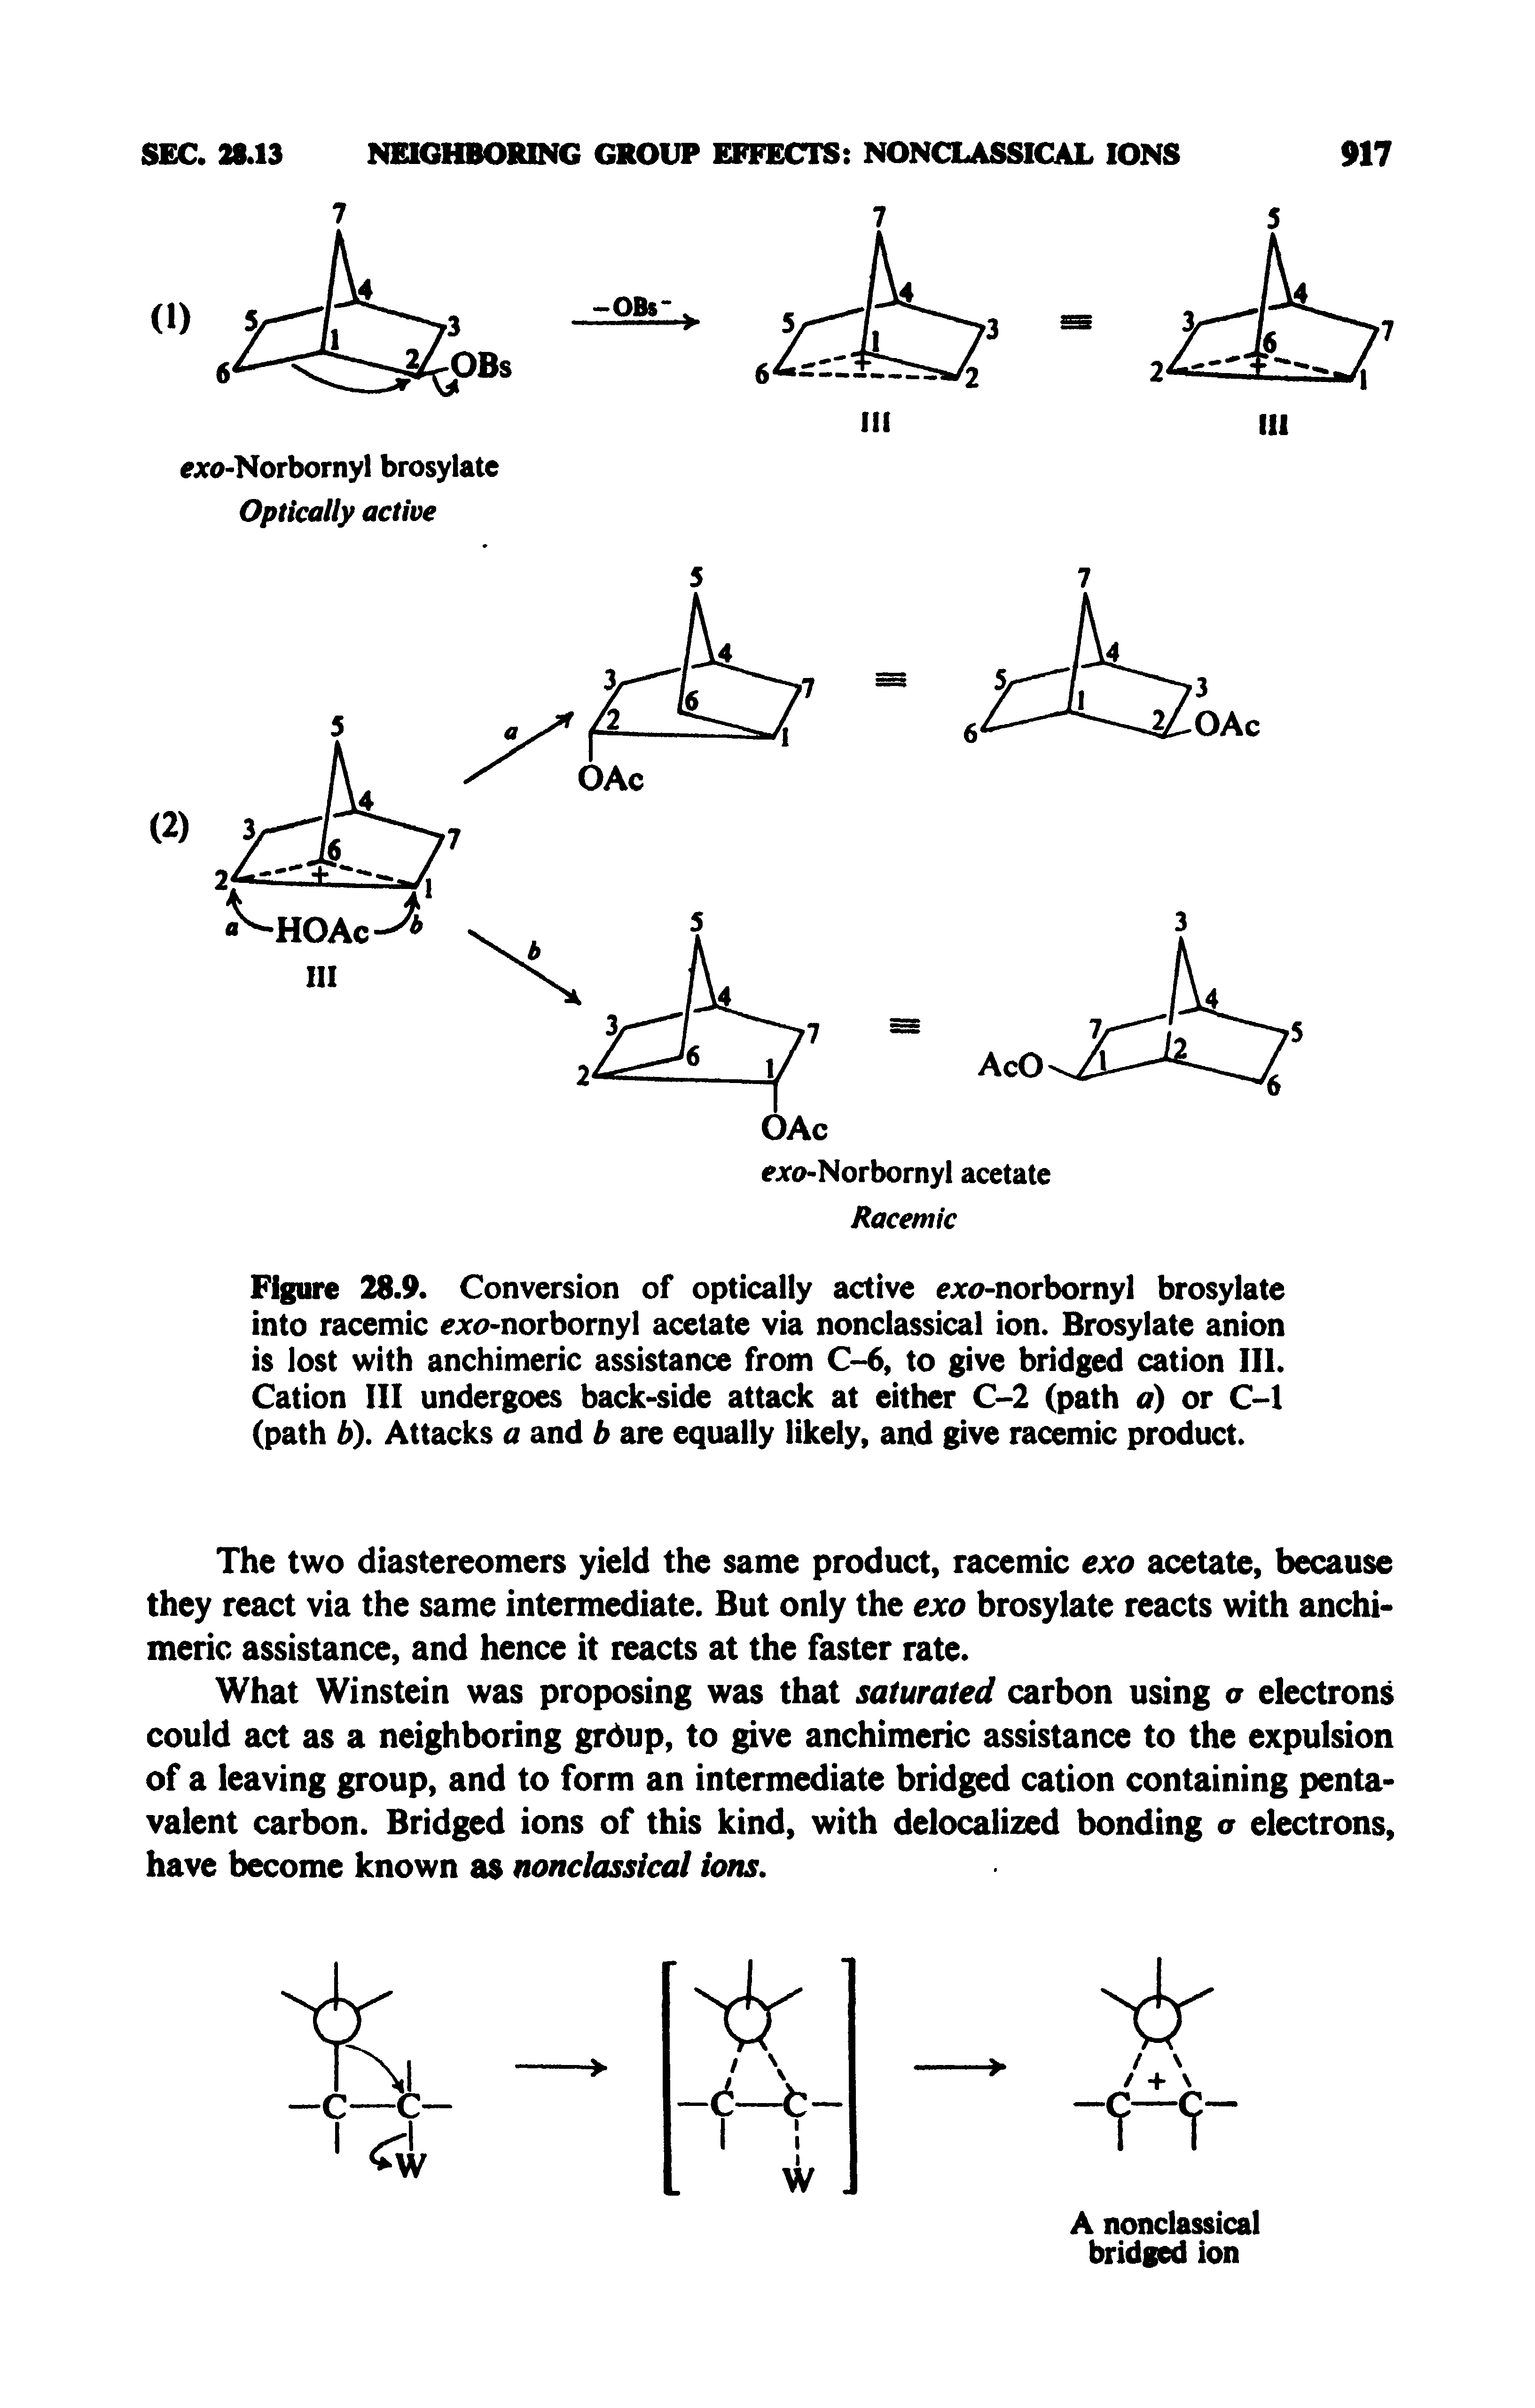 Figure 28.9. Conversion of optically active e c< -norbornyl brosylate into racemic x( >norbornyl acetate via nonclassical ion. Brosylate anion is lost with anchimeric assistance from C-6, to give bridged cation III. Cation III undergoes back-side attack at either C-2 (path a) or C-1 (path b). Attacks a and b are equally likely, and give racemic product.